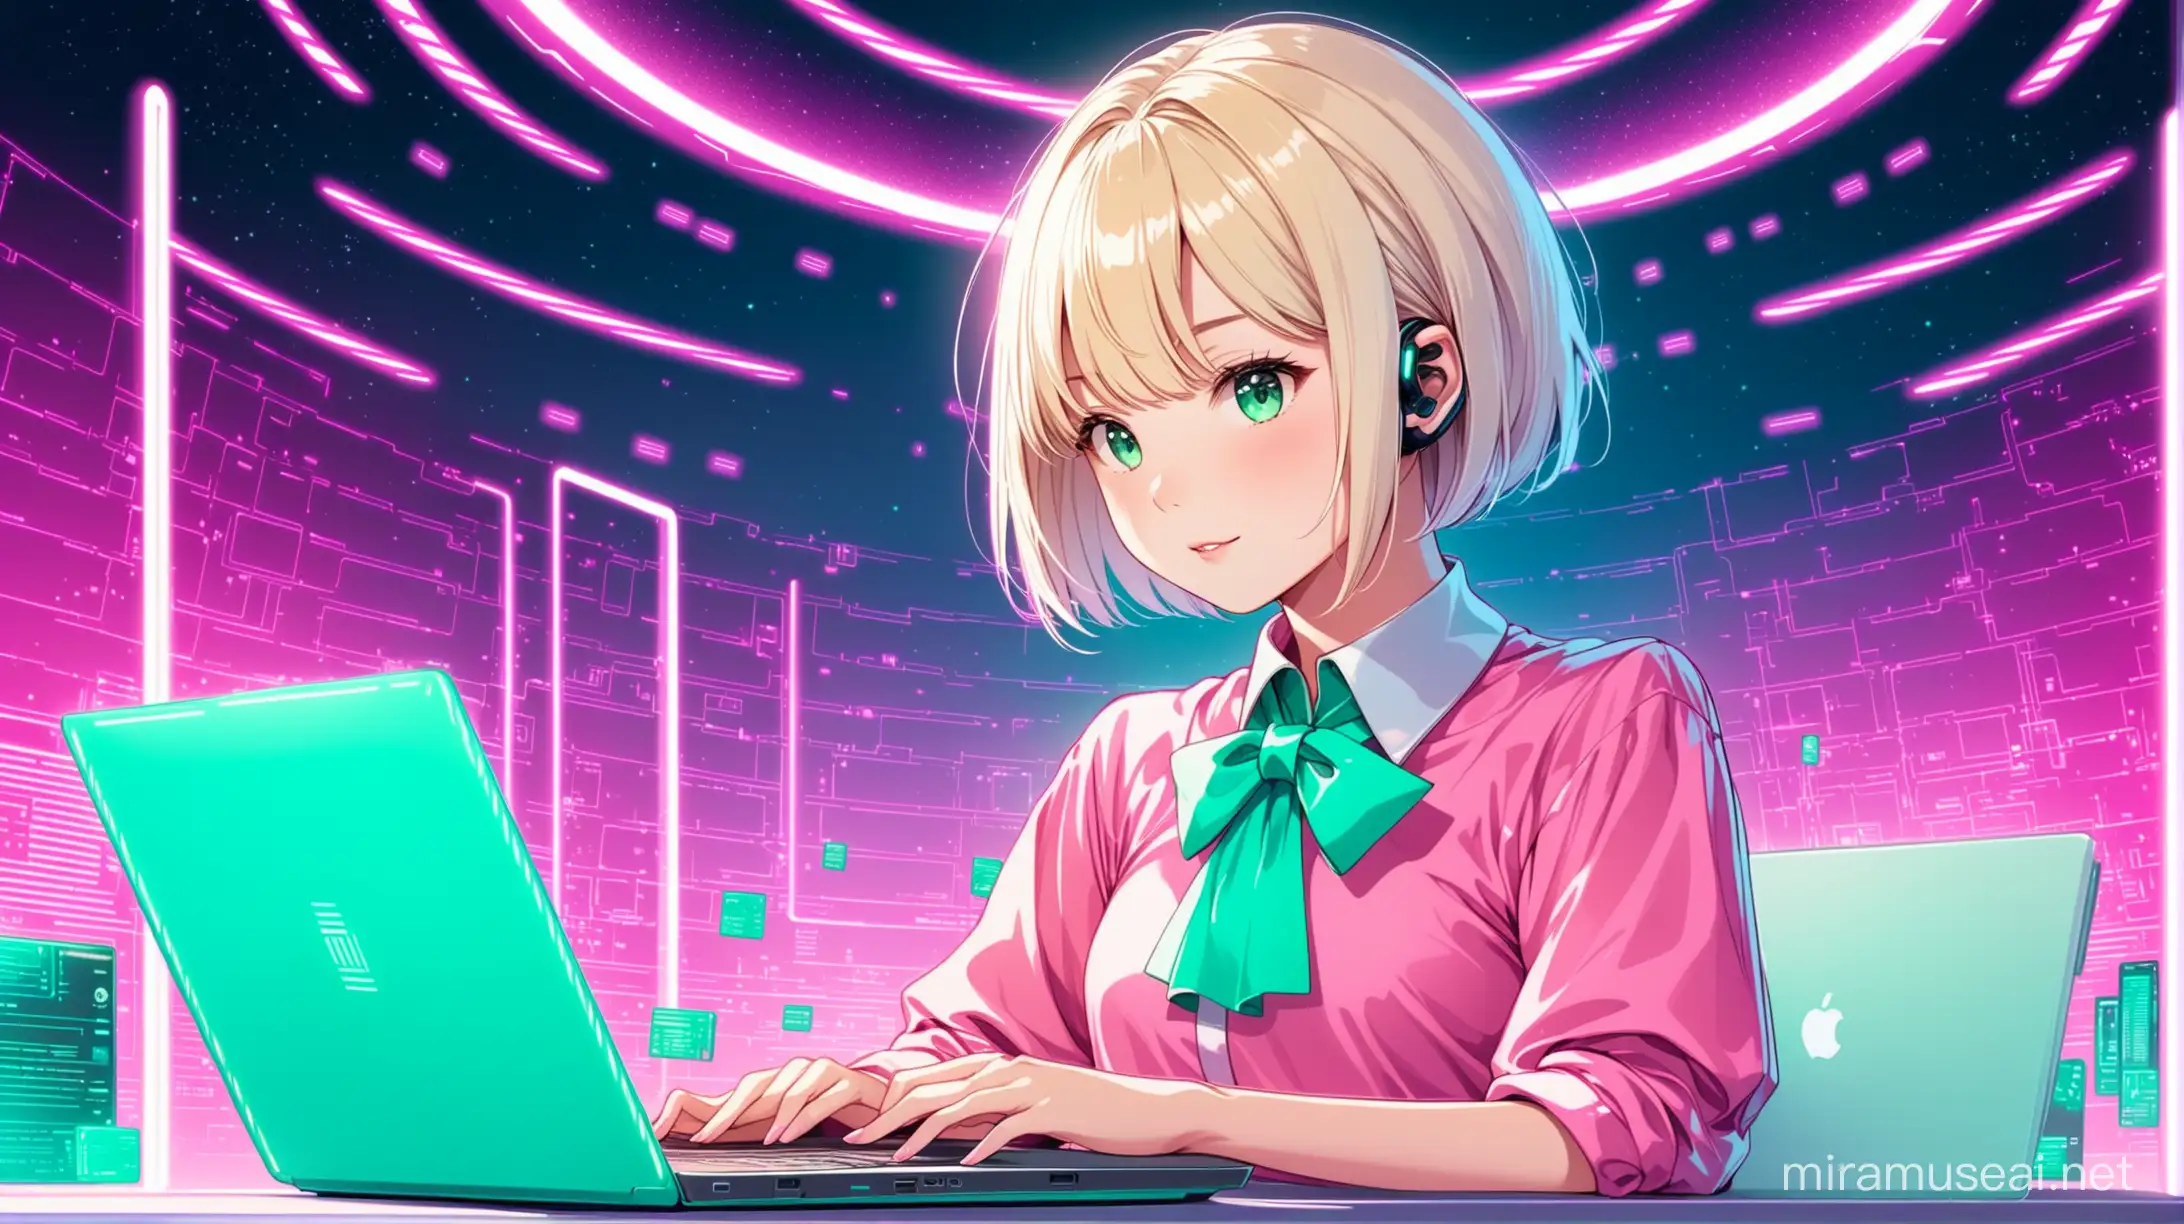 a platinum-blonde short hair girl wearing pink shirt with cravat works with laptop in futuristic-vibe background with mint color